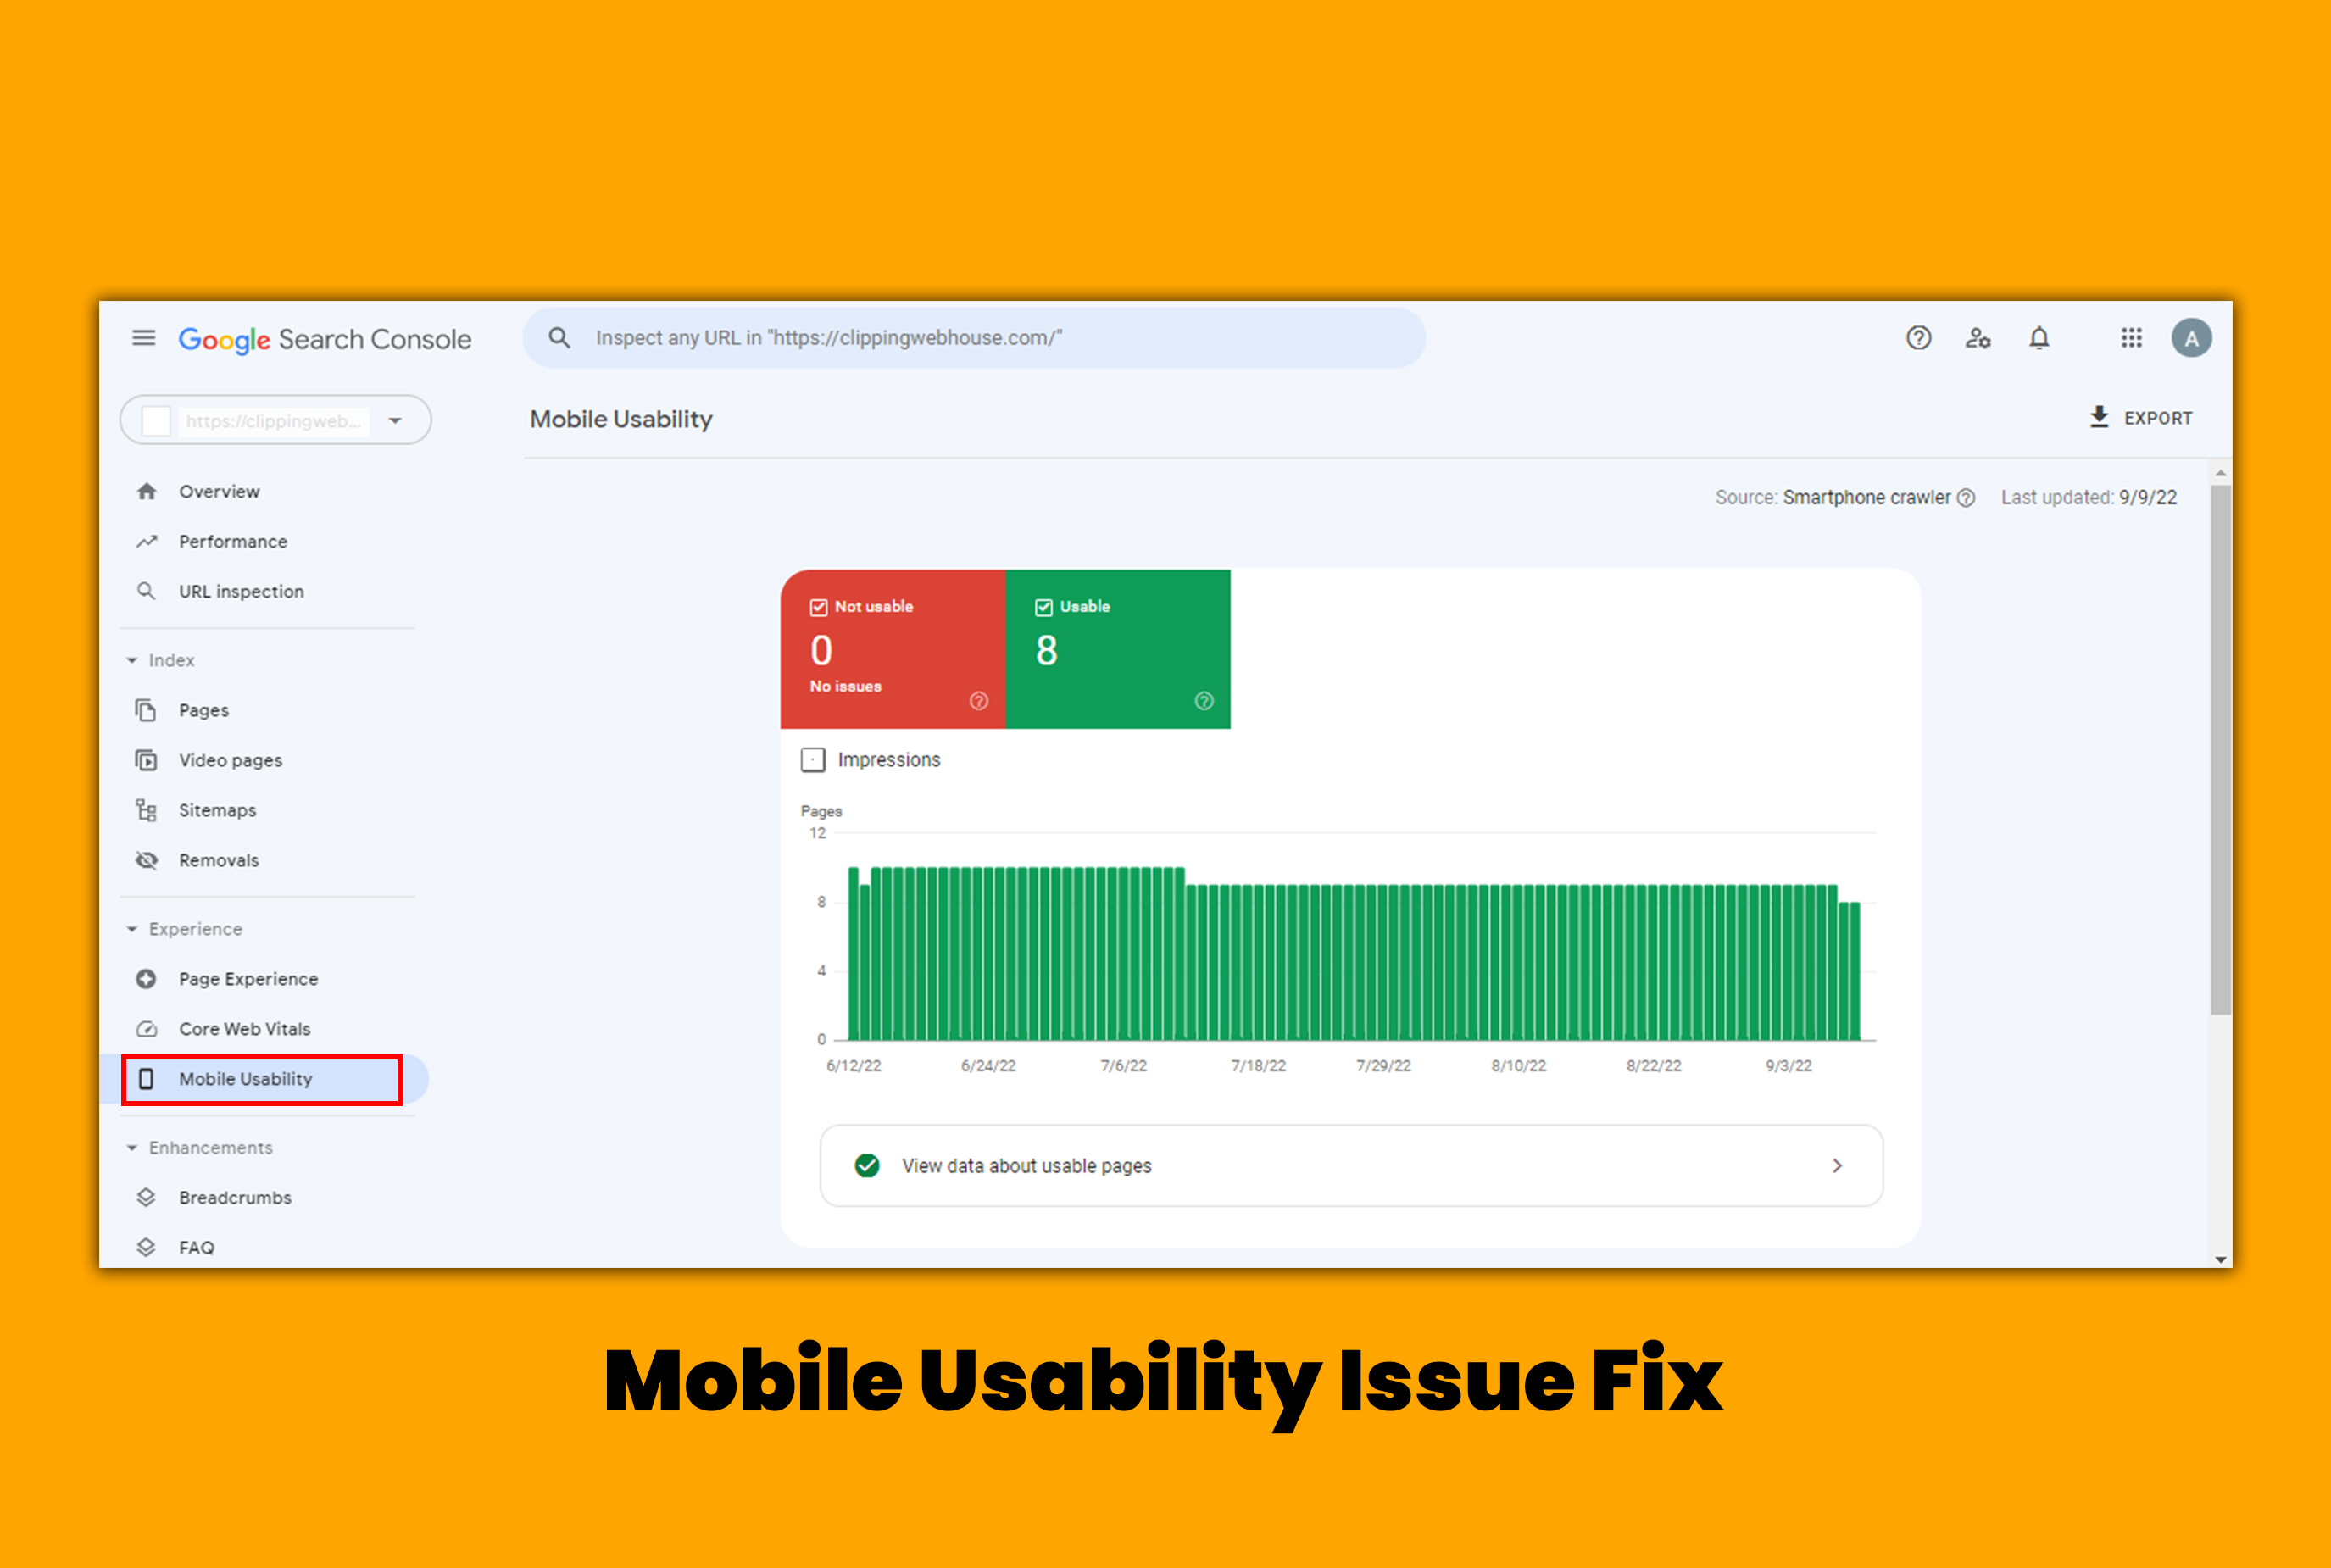 I will Set up Google Search Console and error fixing